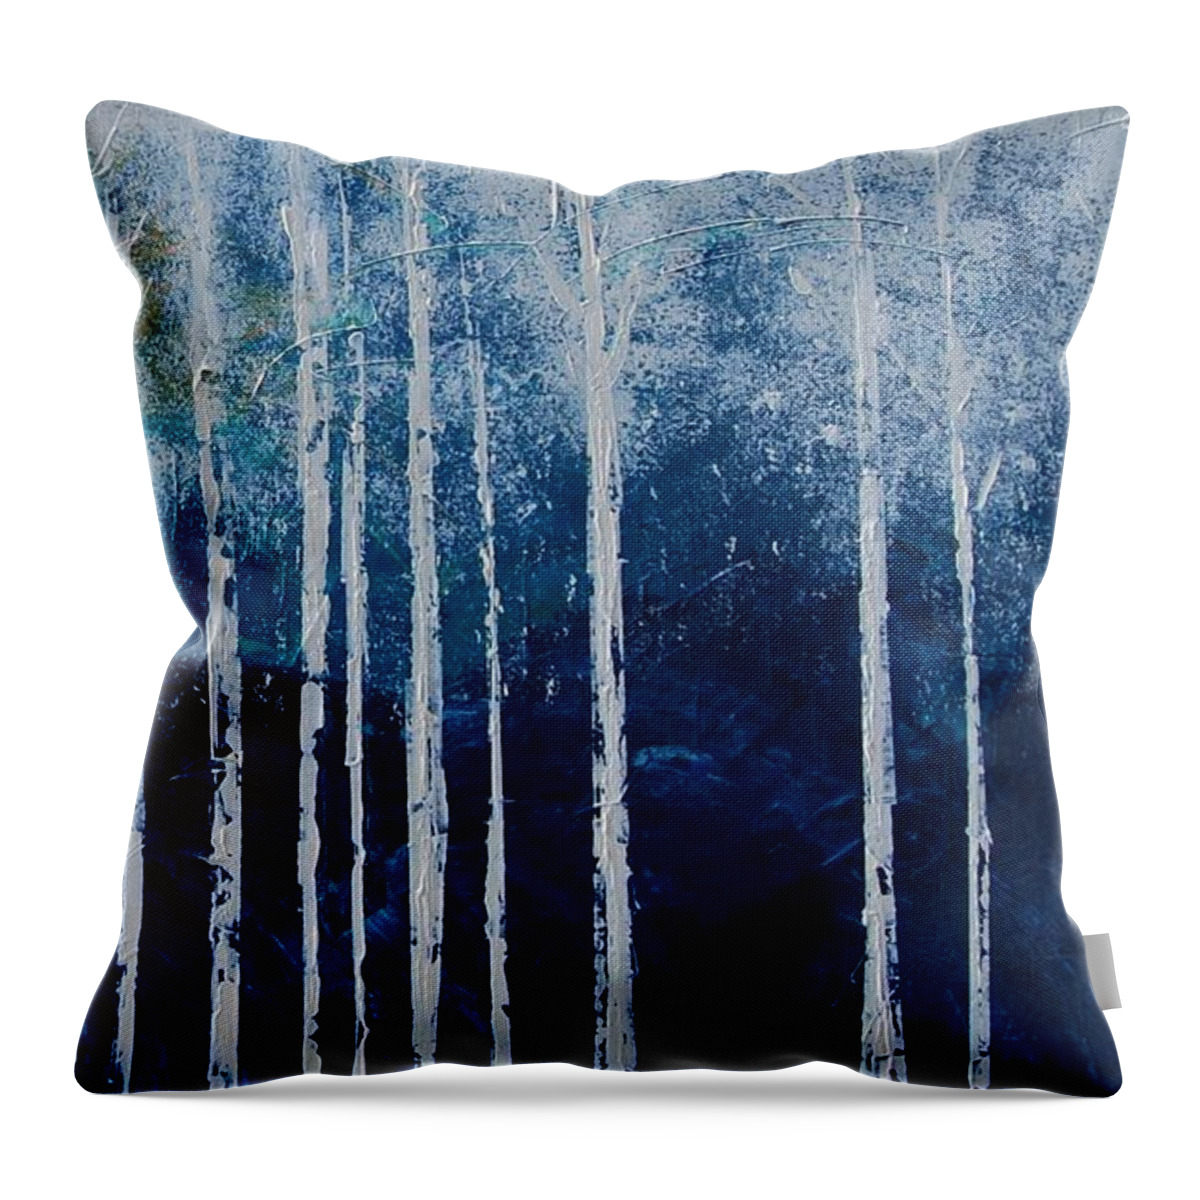 Snow Throw Pillow featuring the painting Shivver by Linda Bailey